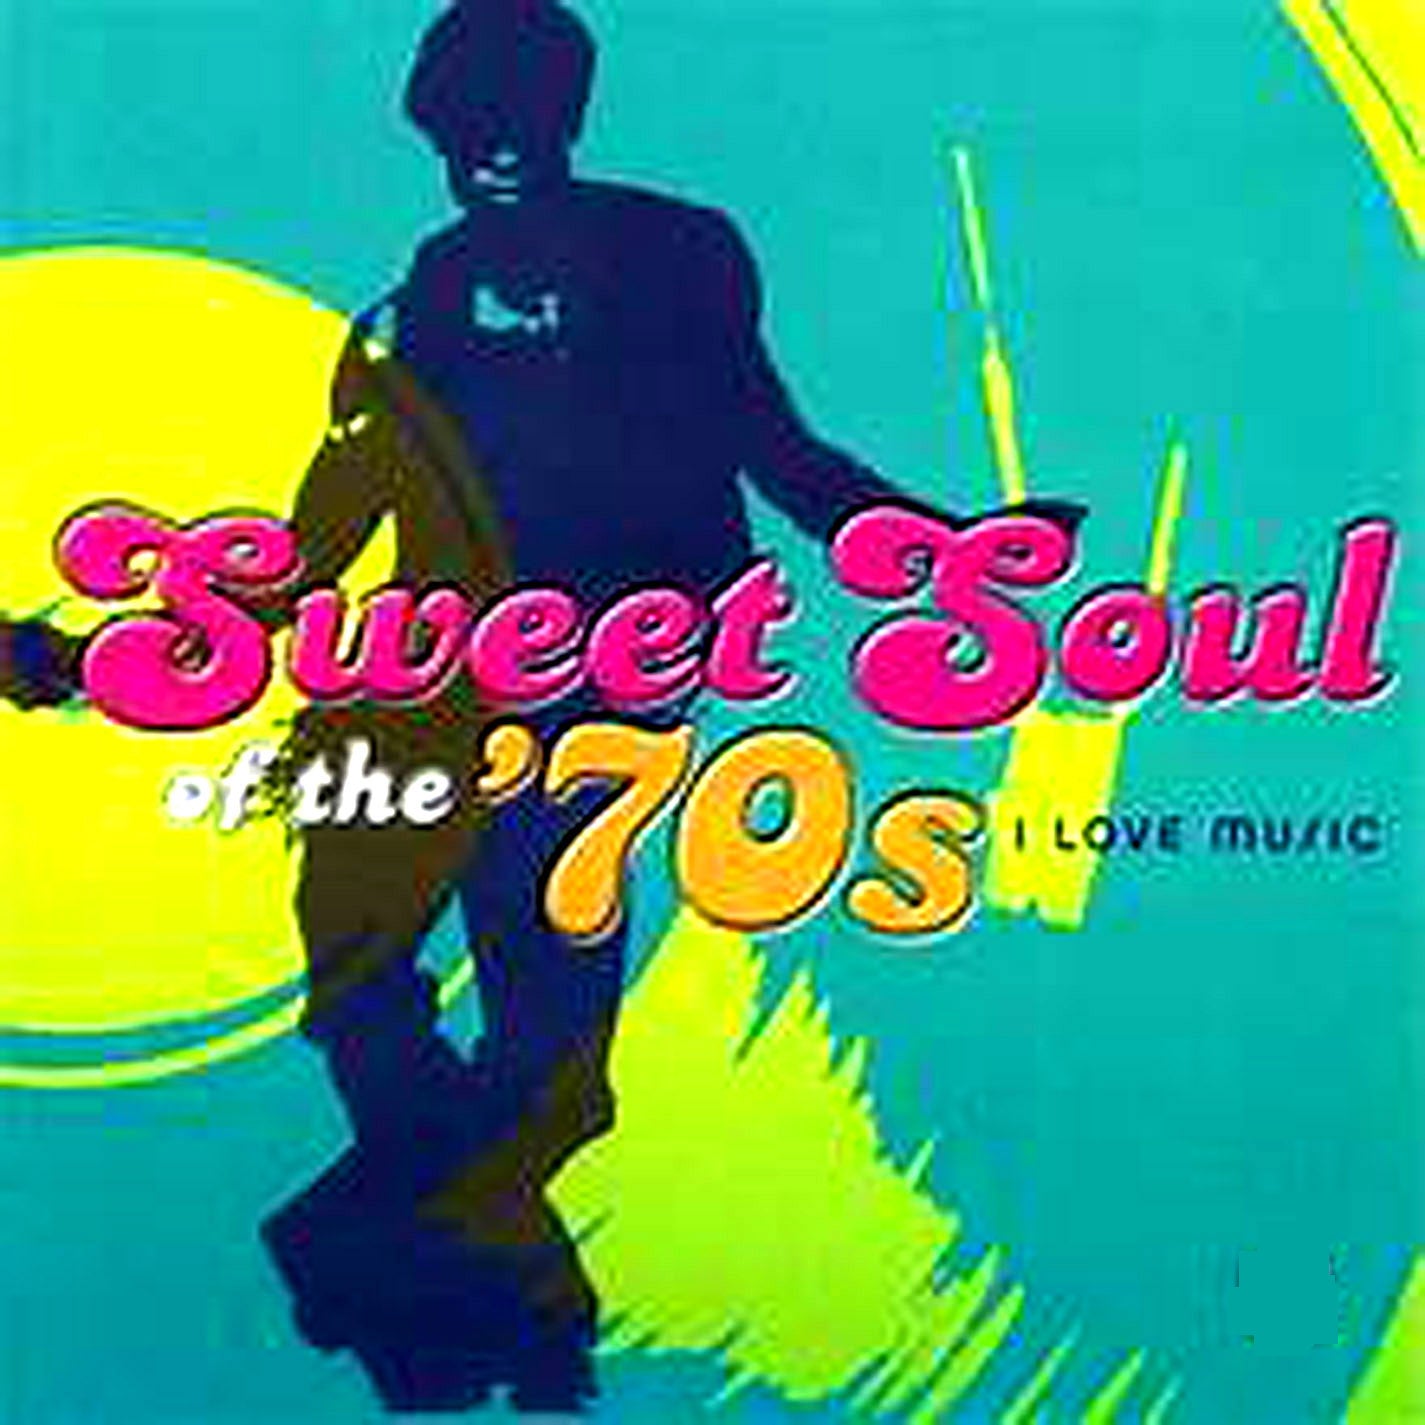 SWEET SOUL OF THE 70'S - I LOVE MUSIC - VARIOUS ARTISTS (CD LP) c1970